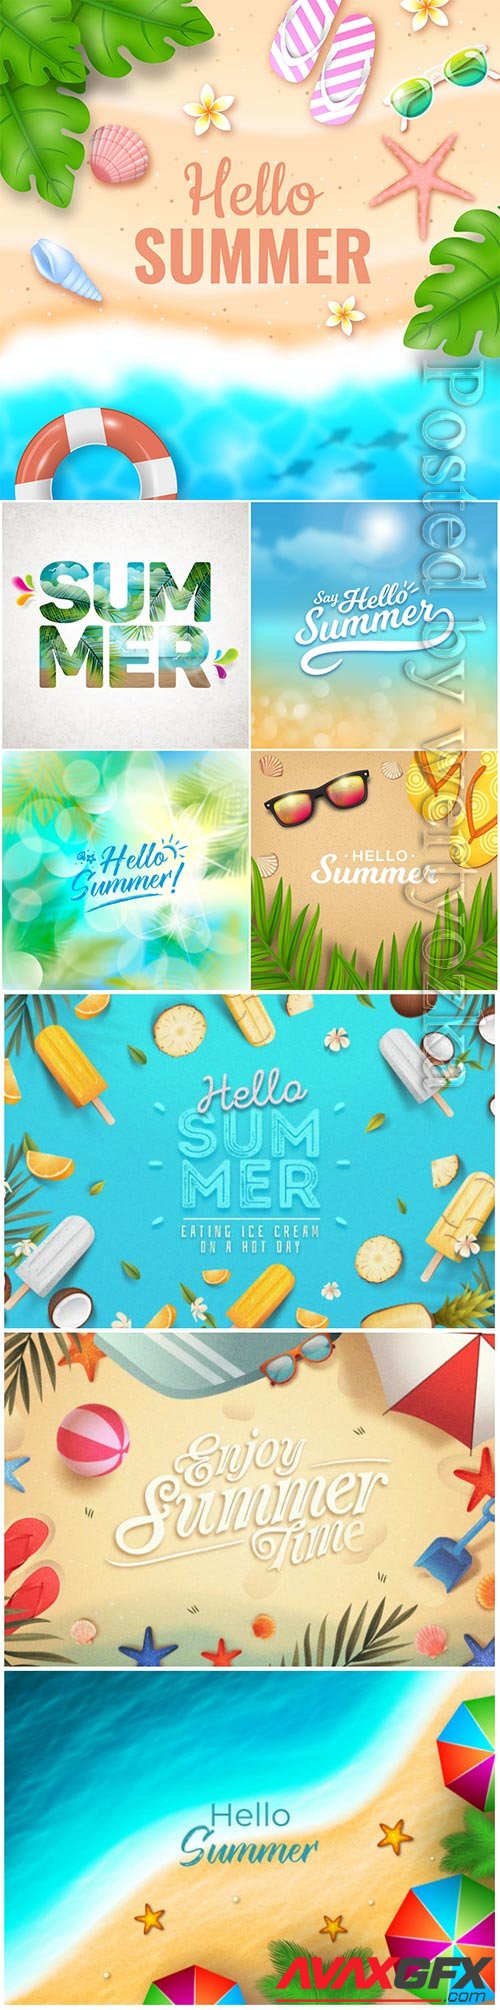 Summer vector collection illustration